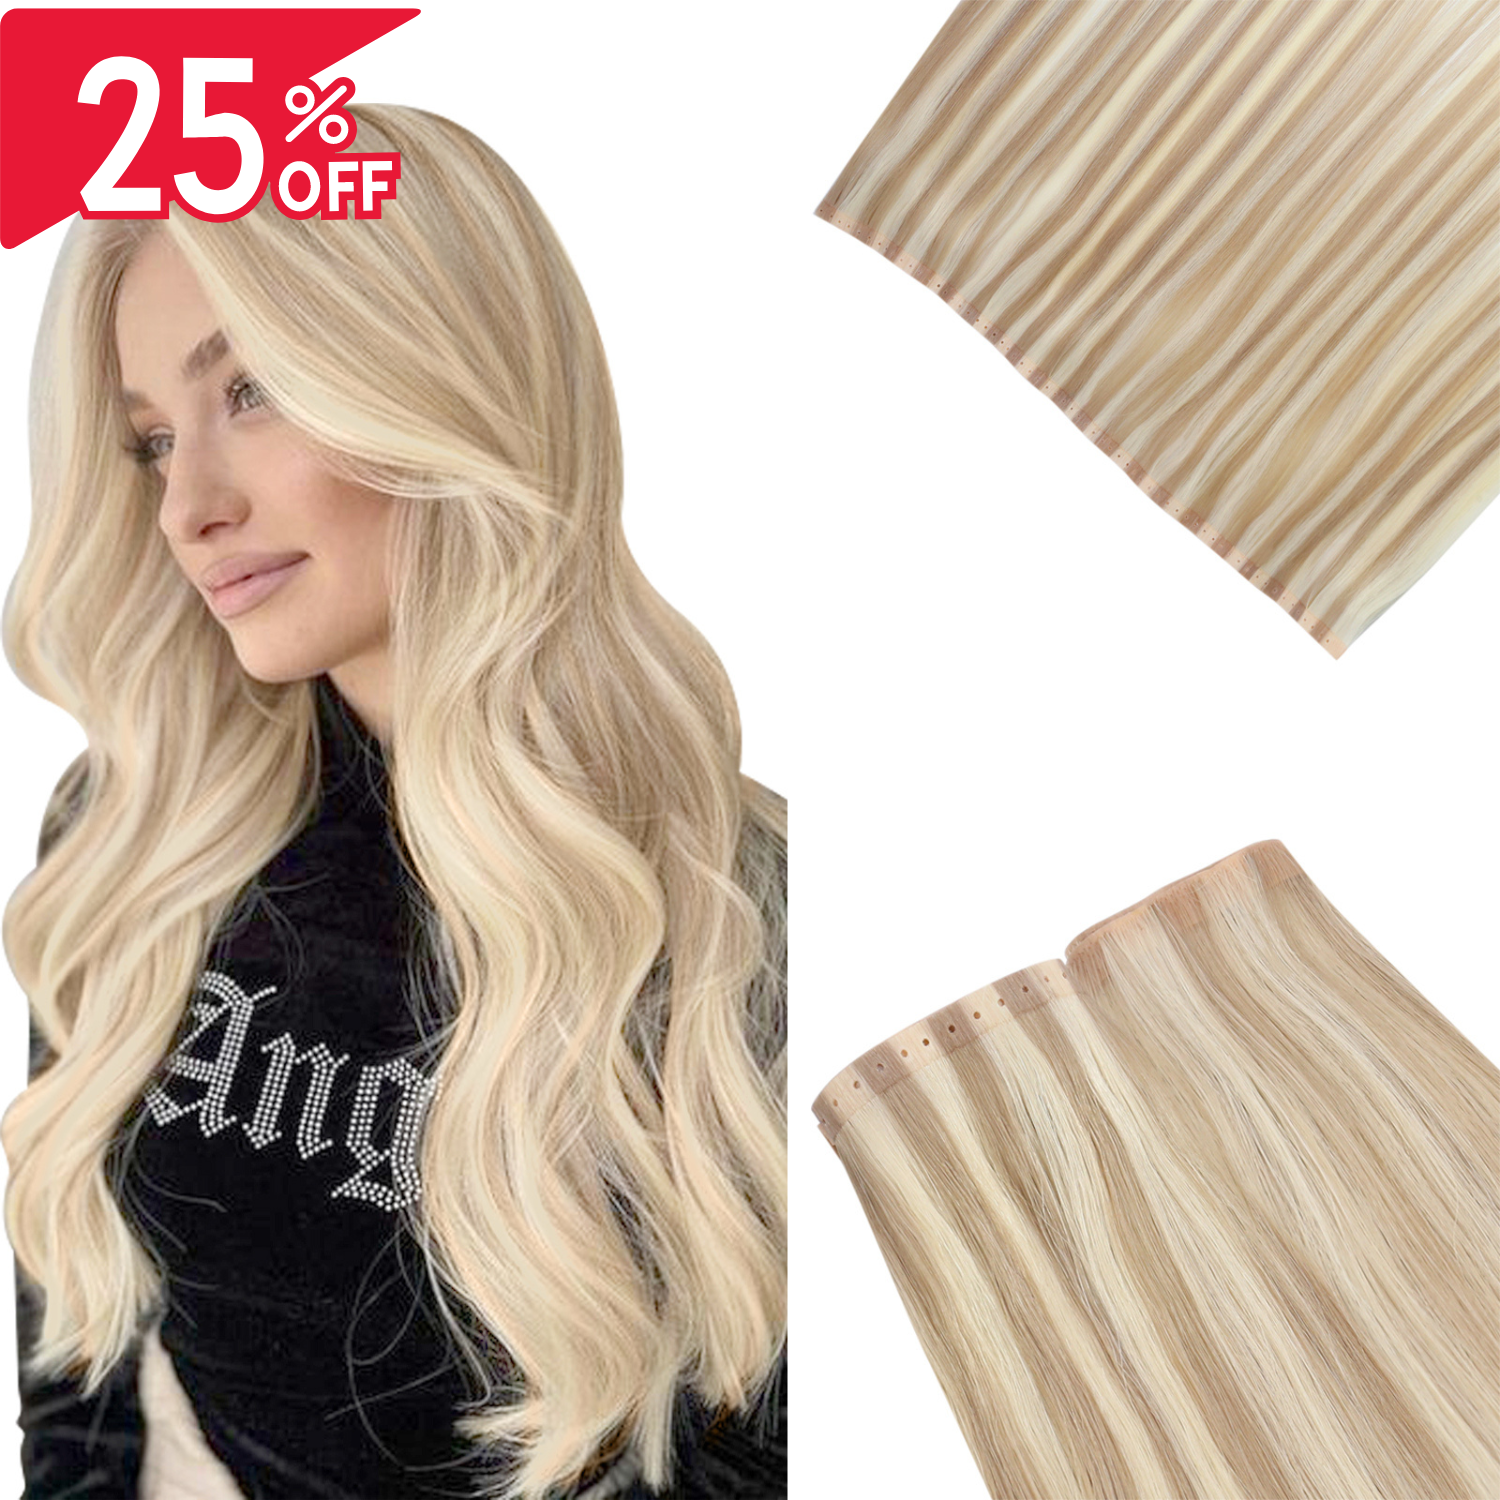 weft hair extensions,sew in weft hair,blonde hair extensions,22 inch hair extensions,invisible weft hair,XO Invisible weft,XO hair extensions,xo invisible weft extensions,pu wefts hair extensions,18 inch hair extensions,pu hole invisible wefts